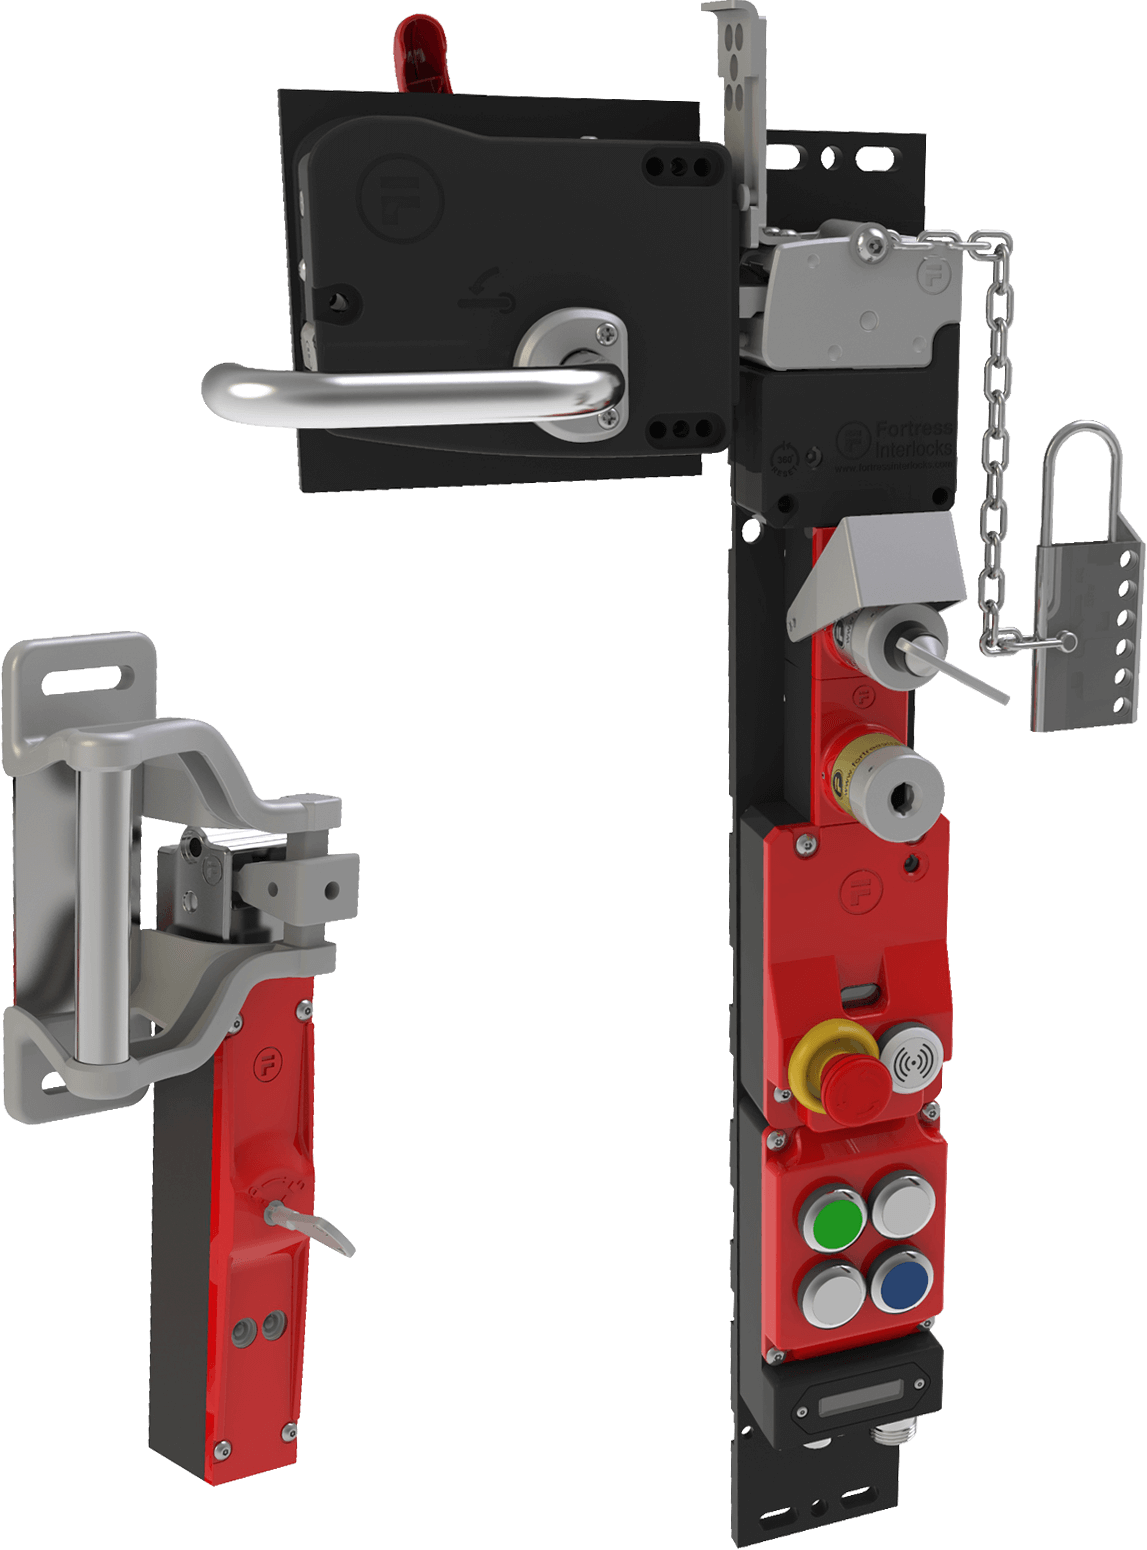 Fortress amgard pro safety interlocks with configurable buttons and lamps, access control, escape release and safety keys